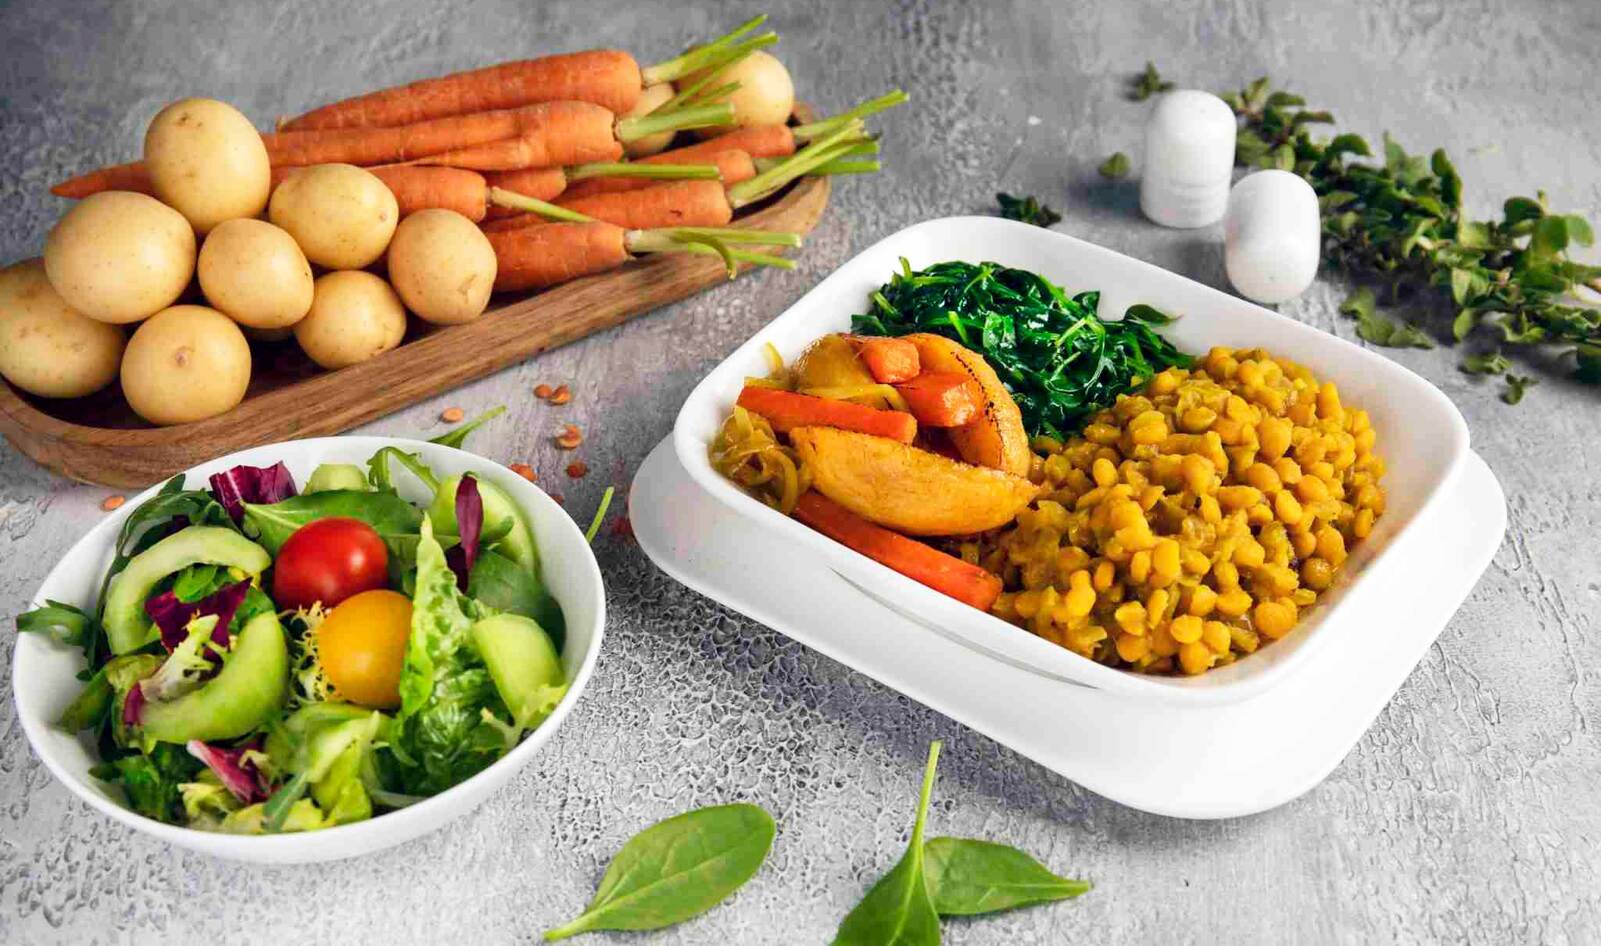 Emirates Airlines Adds Vegan Meals to In-Flight Menus for January